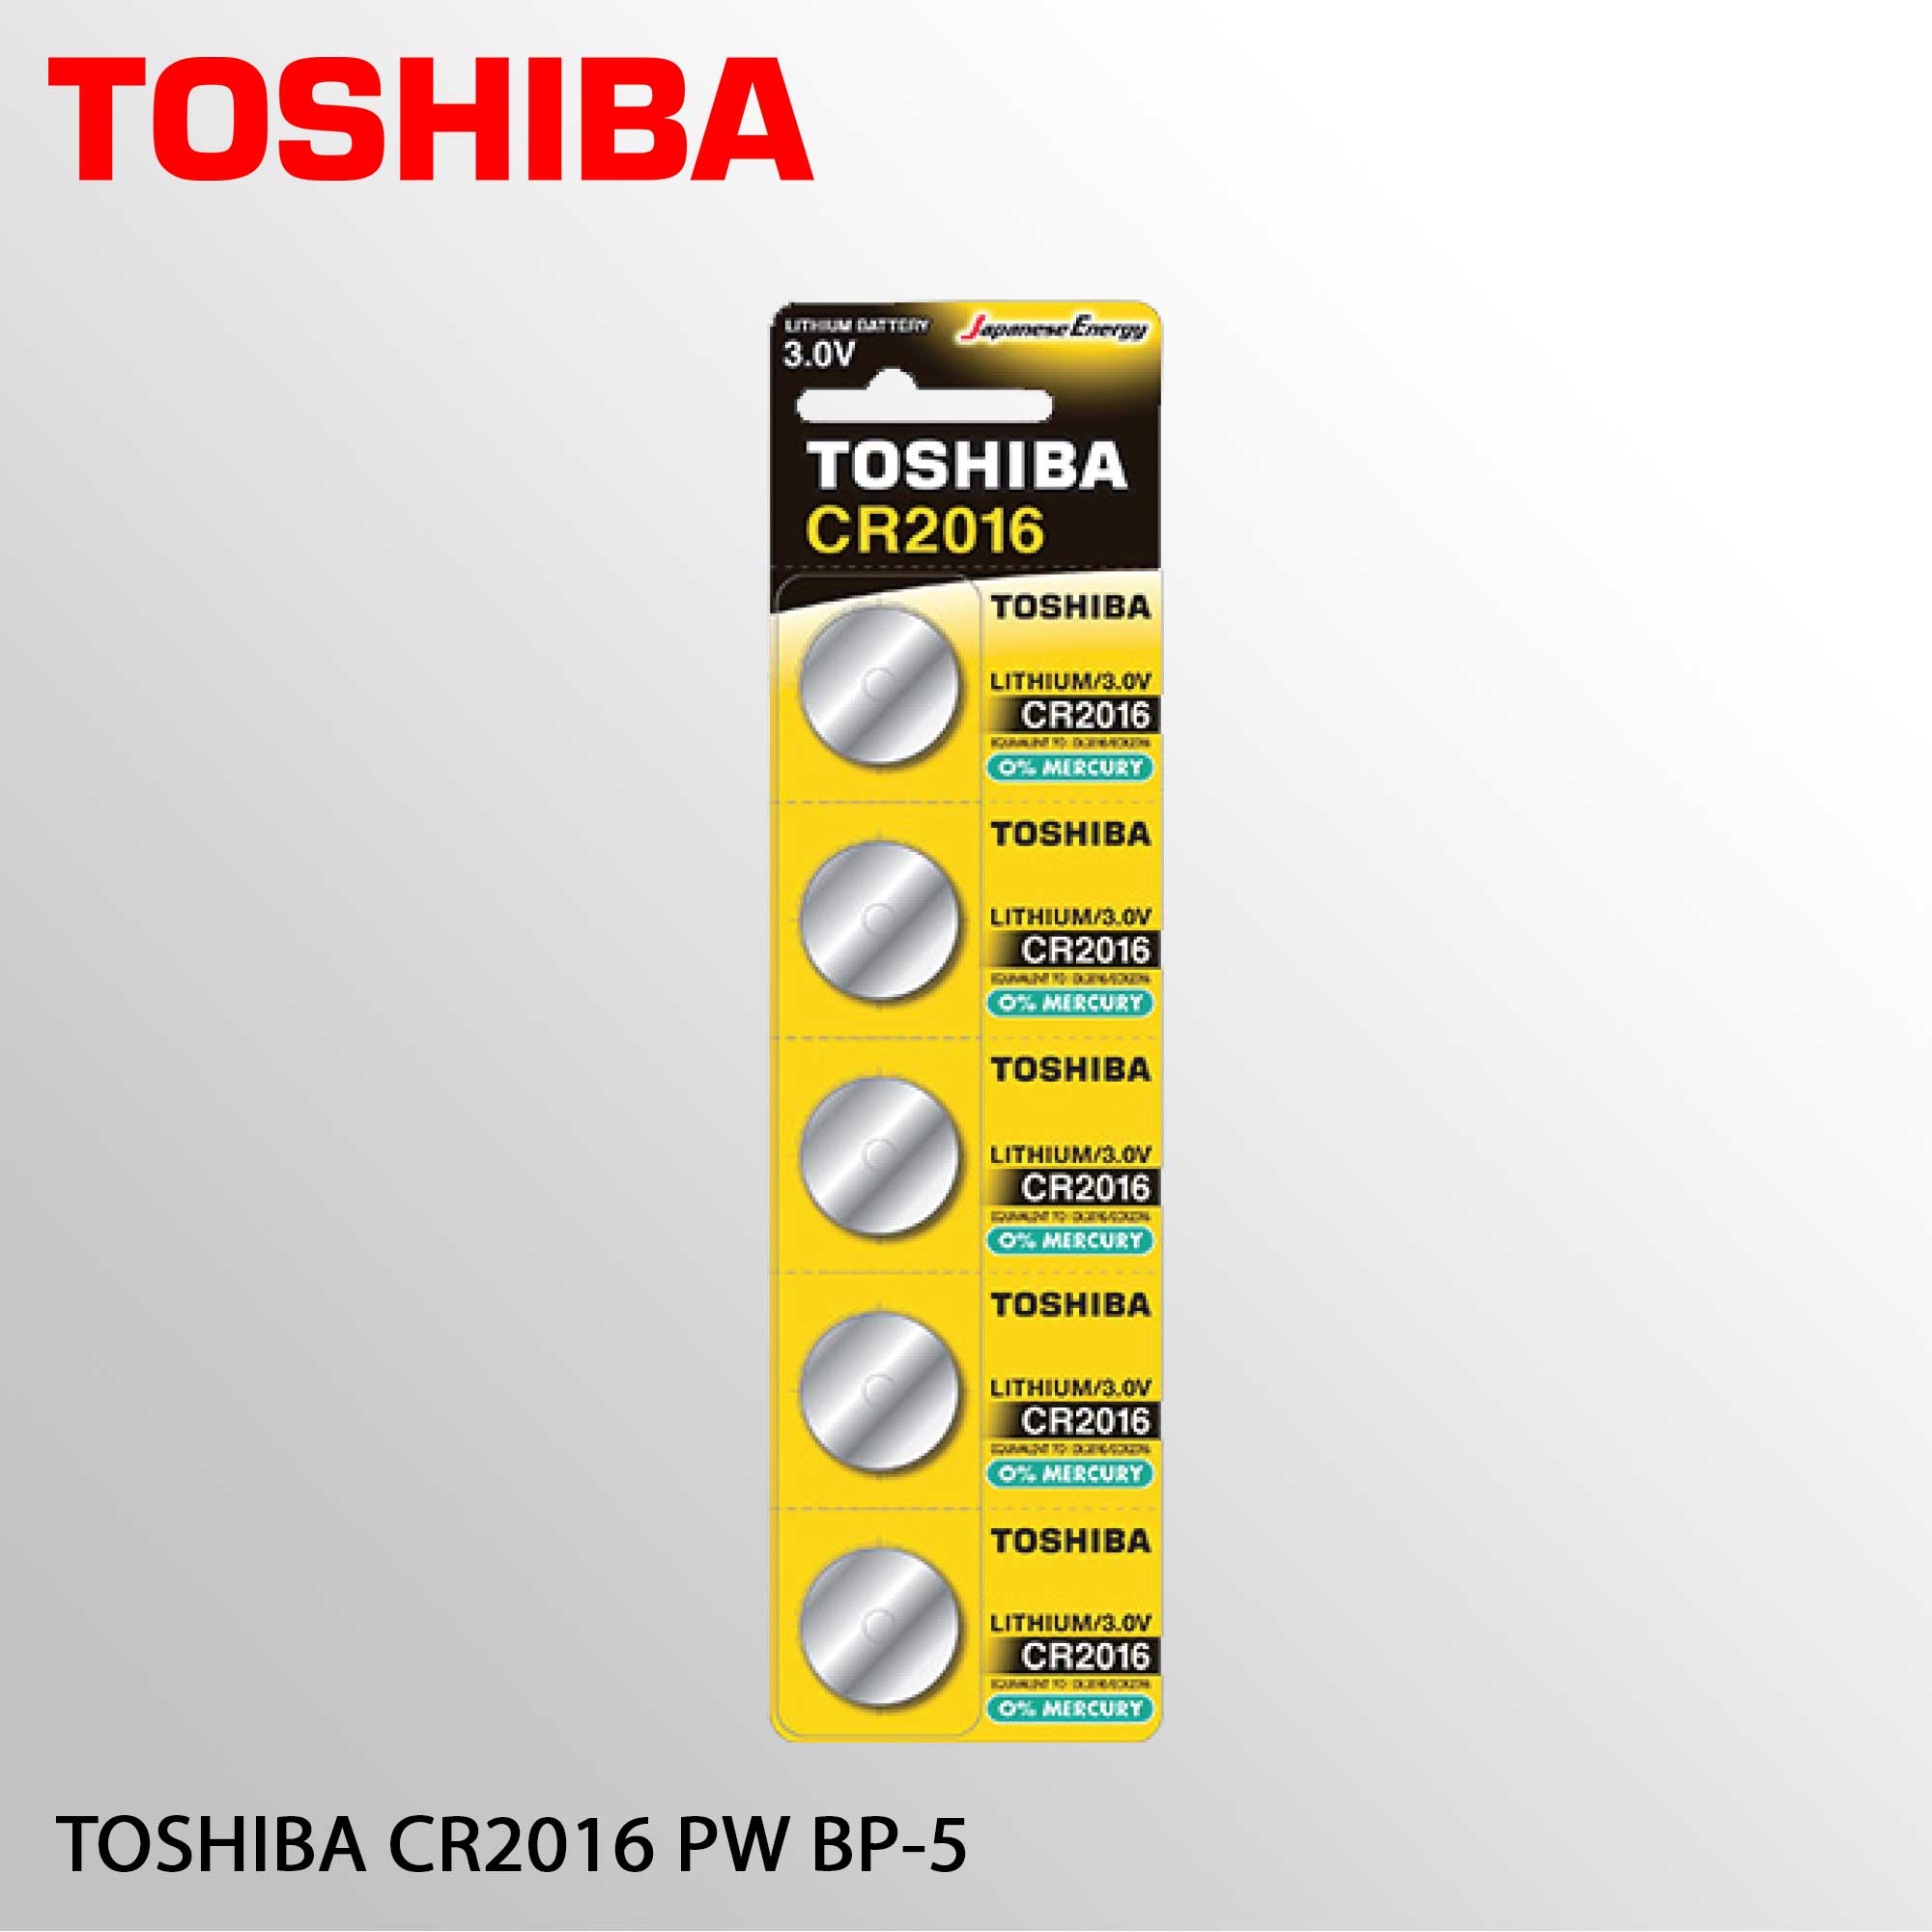 TOSHIBA CR2016 PW BP-5 PACK Of 5